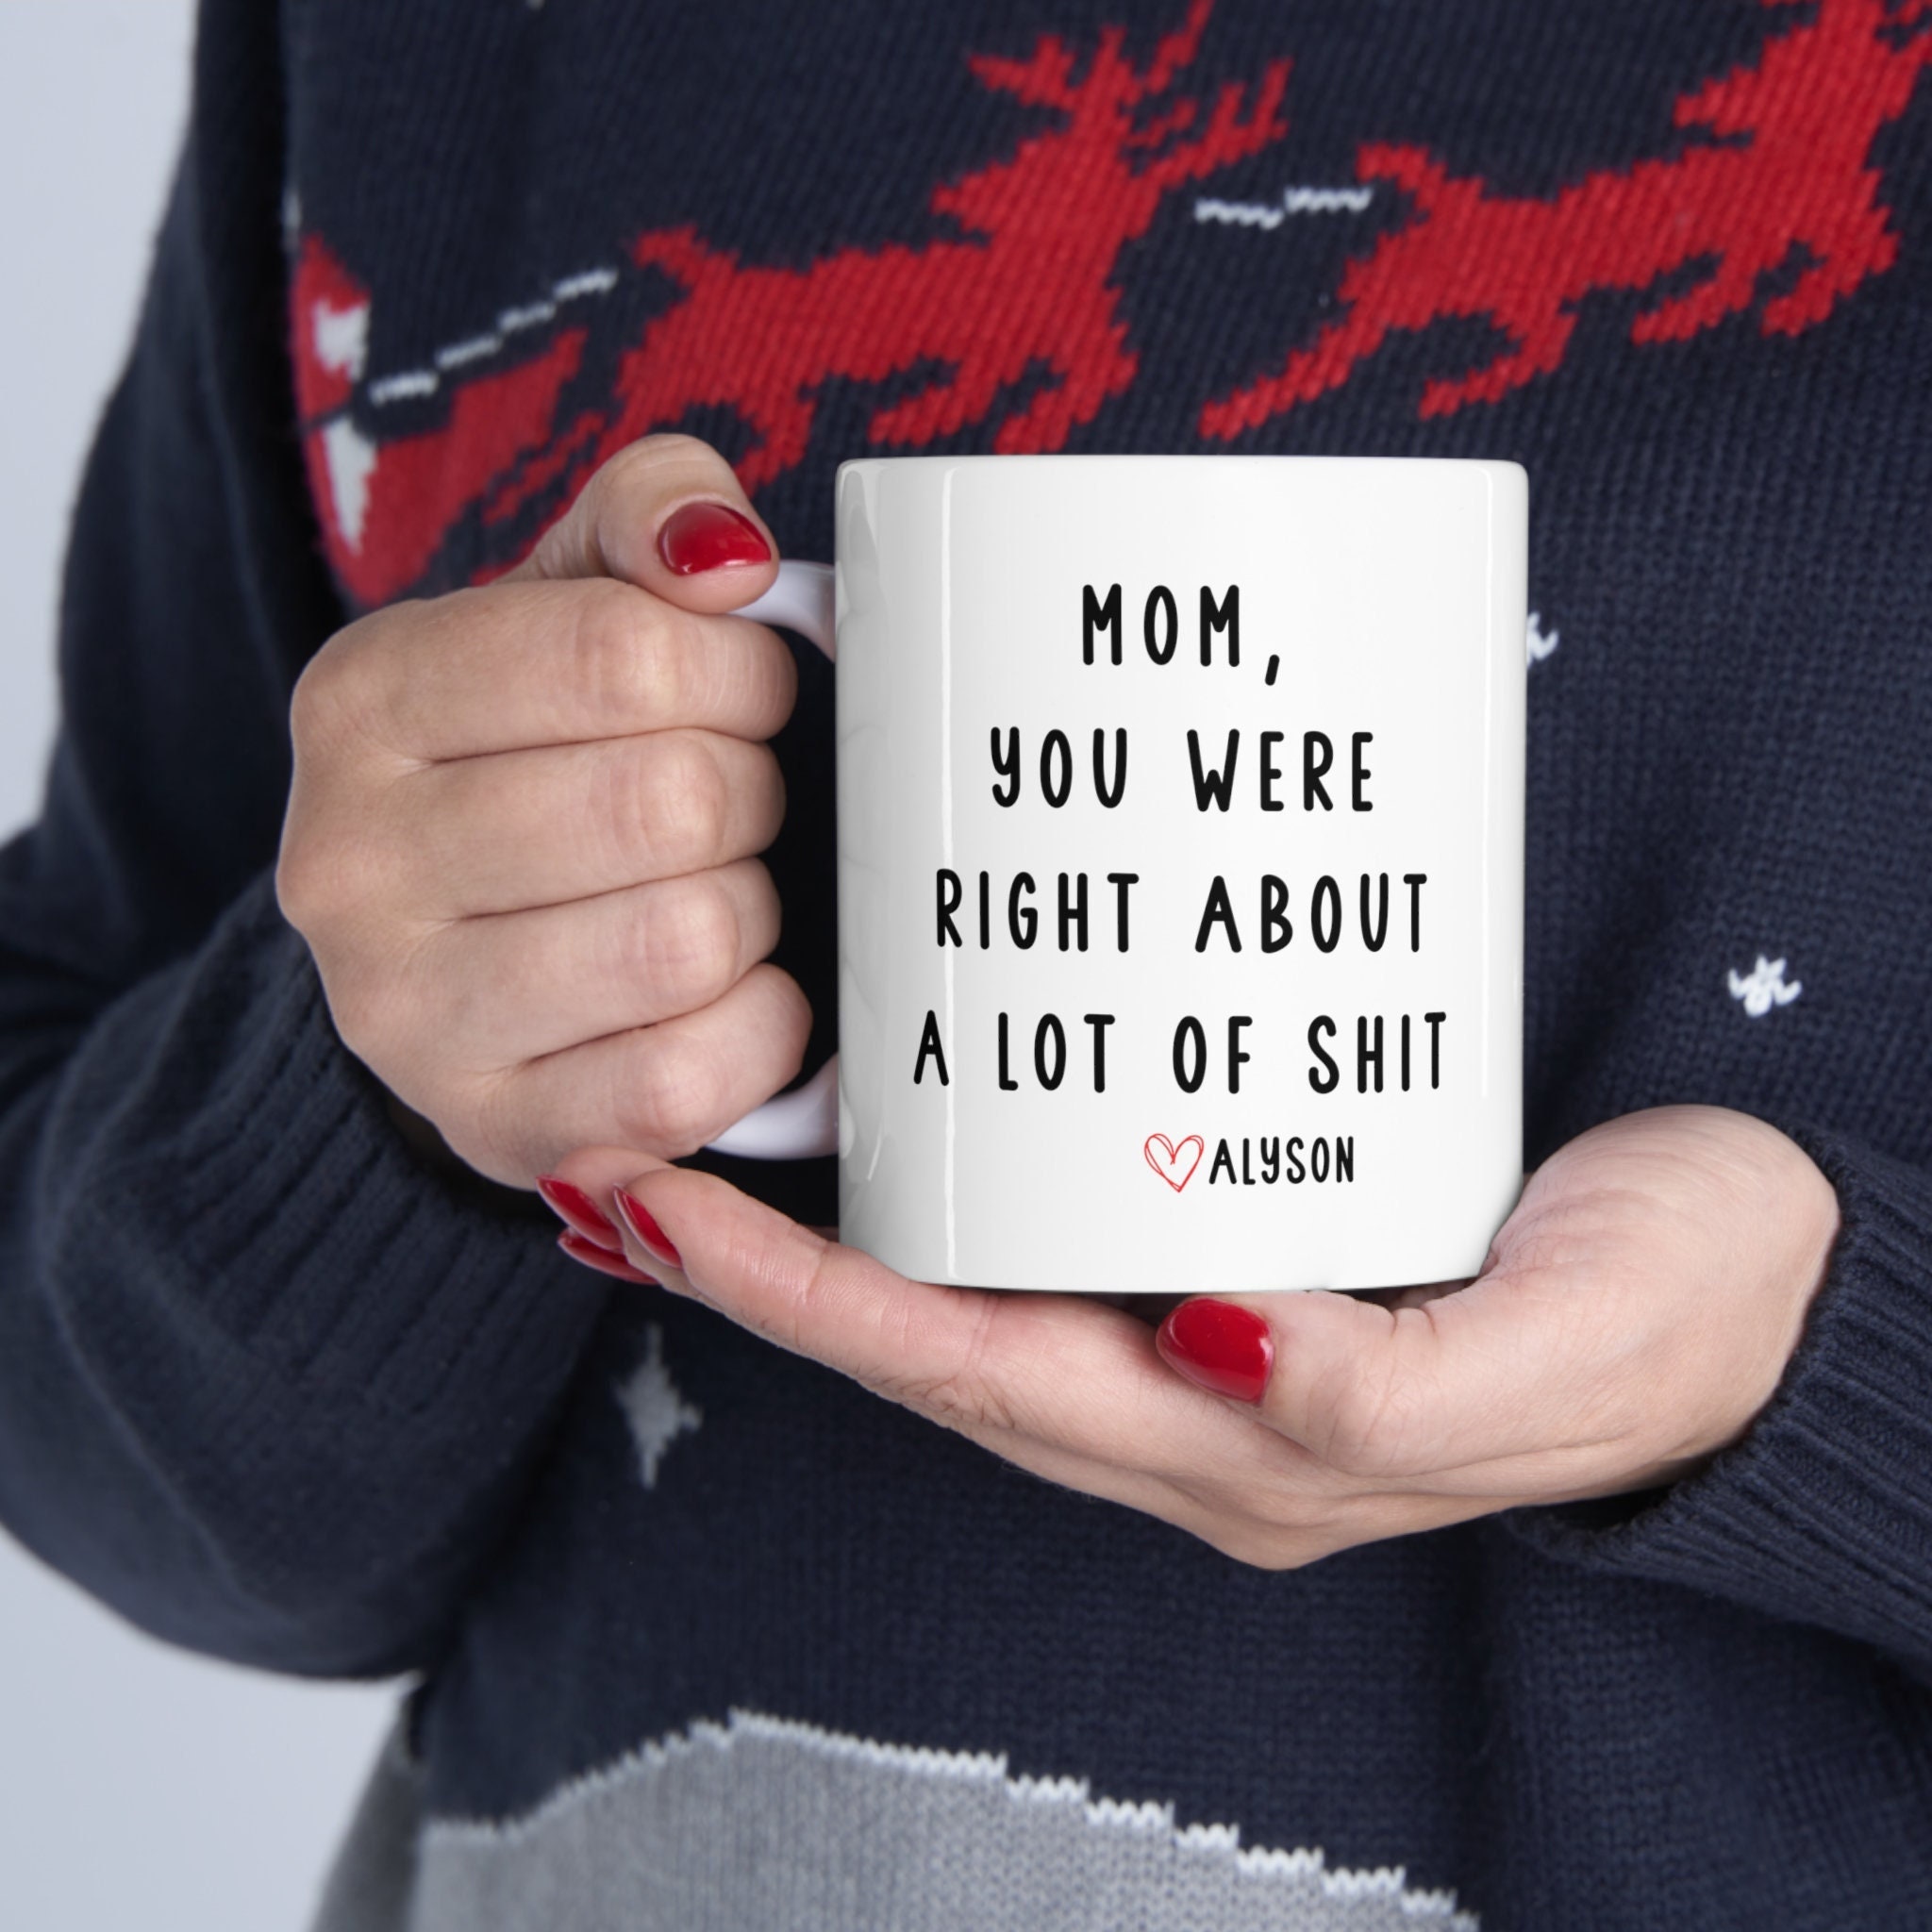 Mom You Were Right About A Lot Of Shit Coffee Mug - Mother’s Day Gift